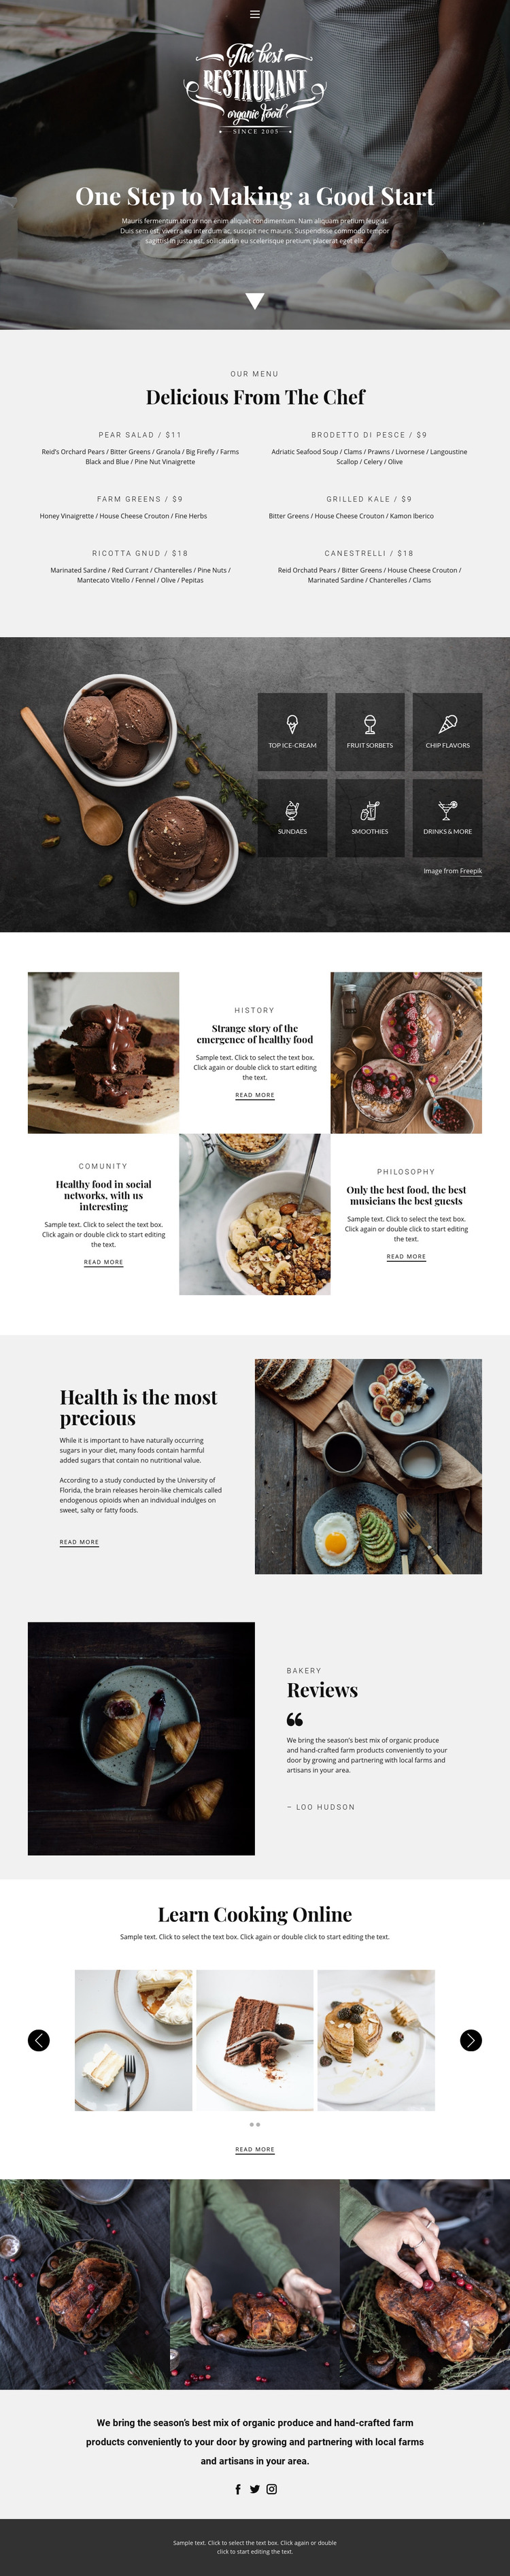 Recipes and cook lessons Homepage Design